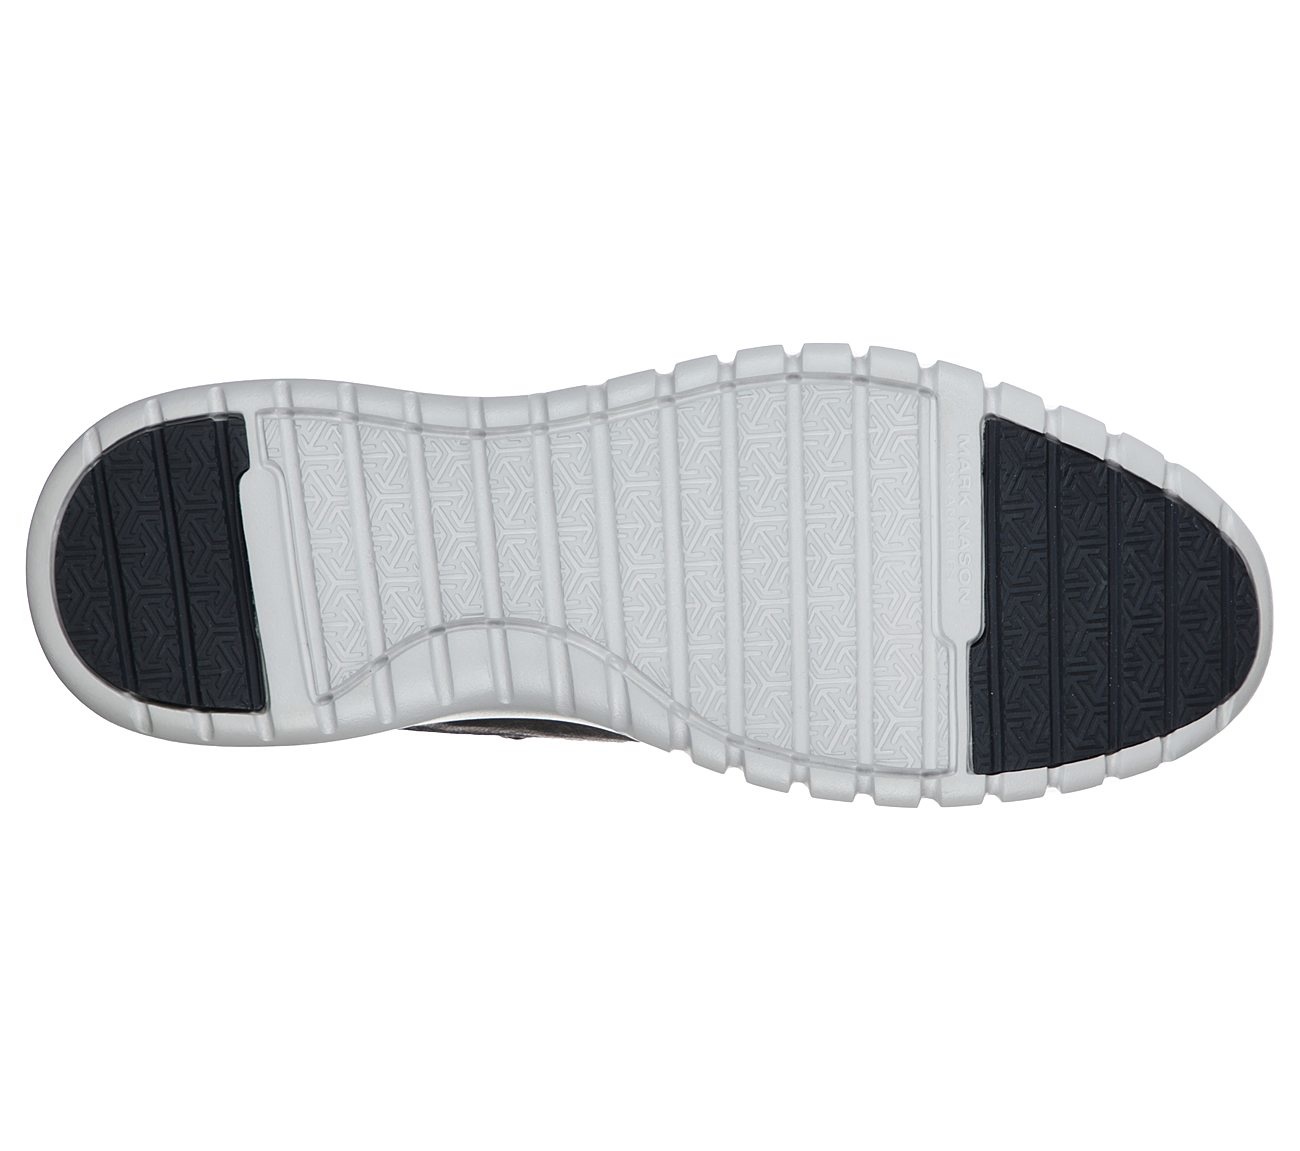 SKECHERS M NEOCASUAL CANABY SLIP ON